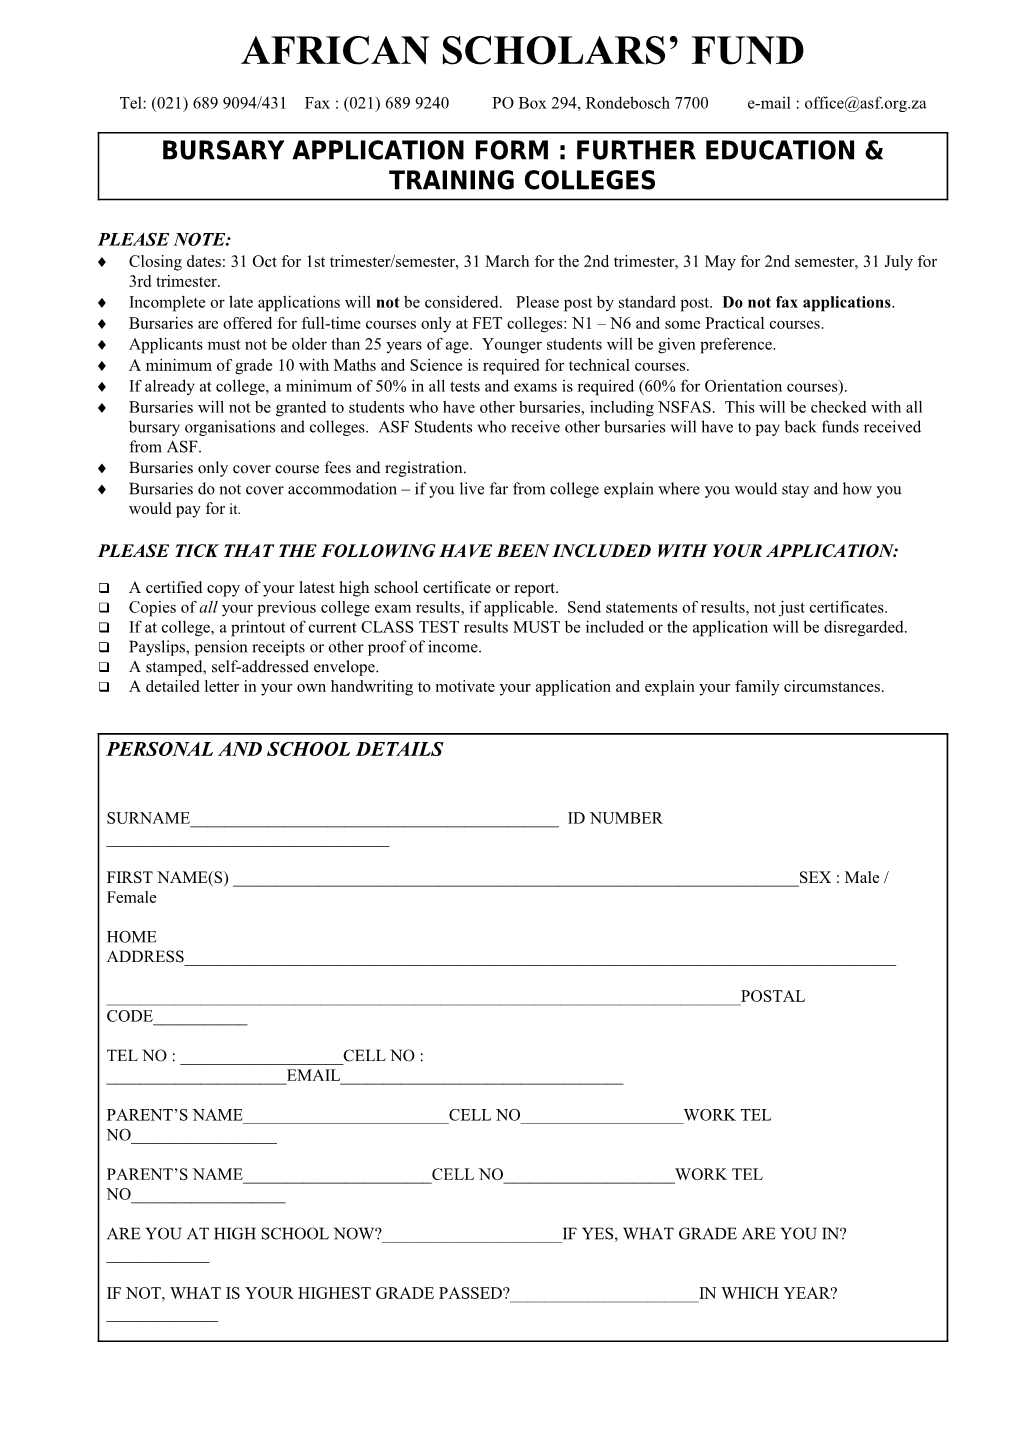 Bursary Application Form : Further Education & Training Colleges